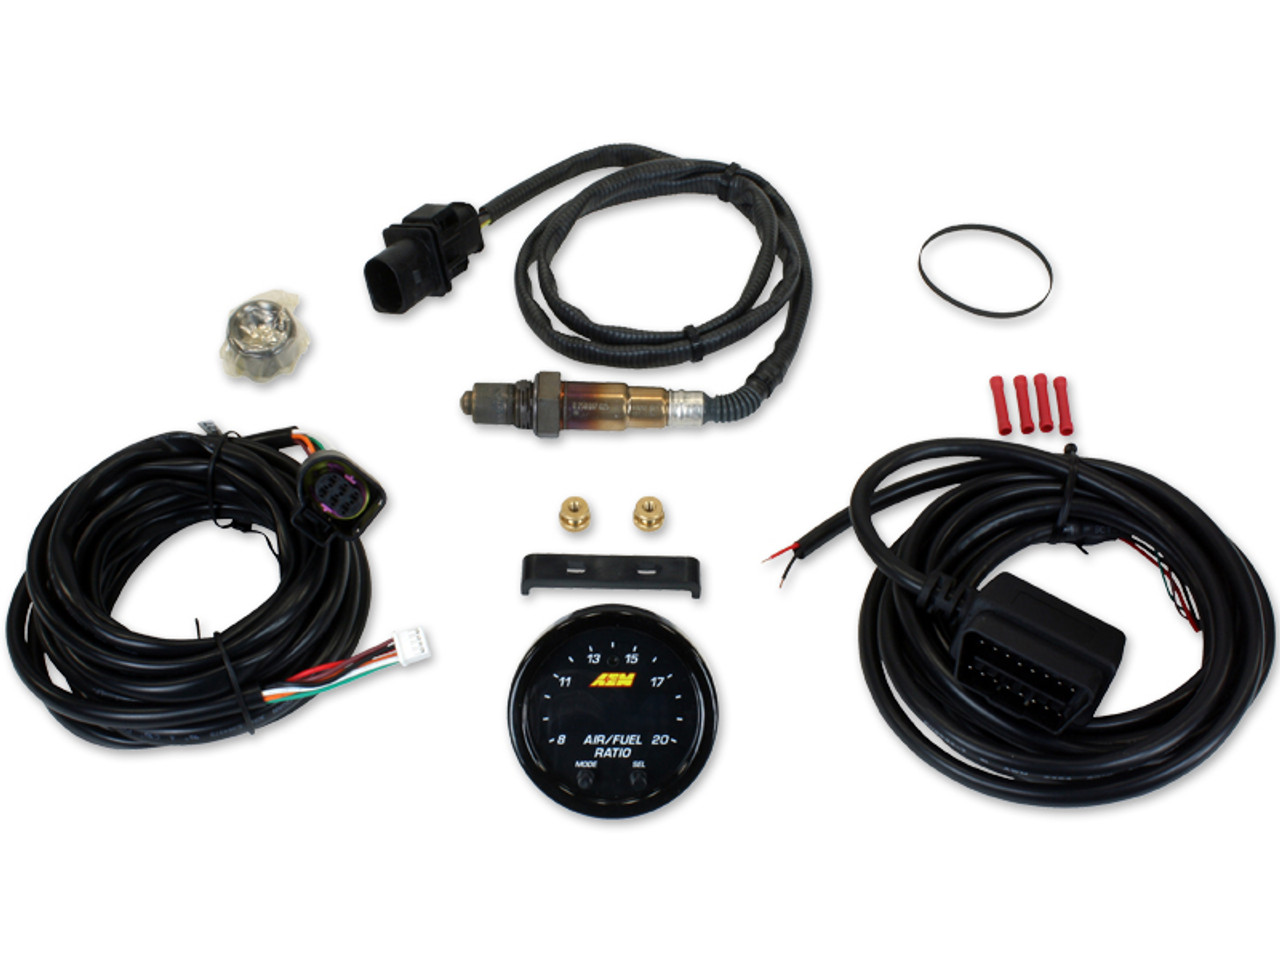 X-Series AFR Gauge. Validated to work w/ EFILive, HPTuners and DashDaq software